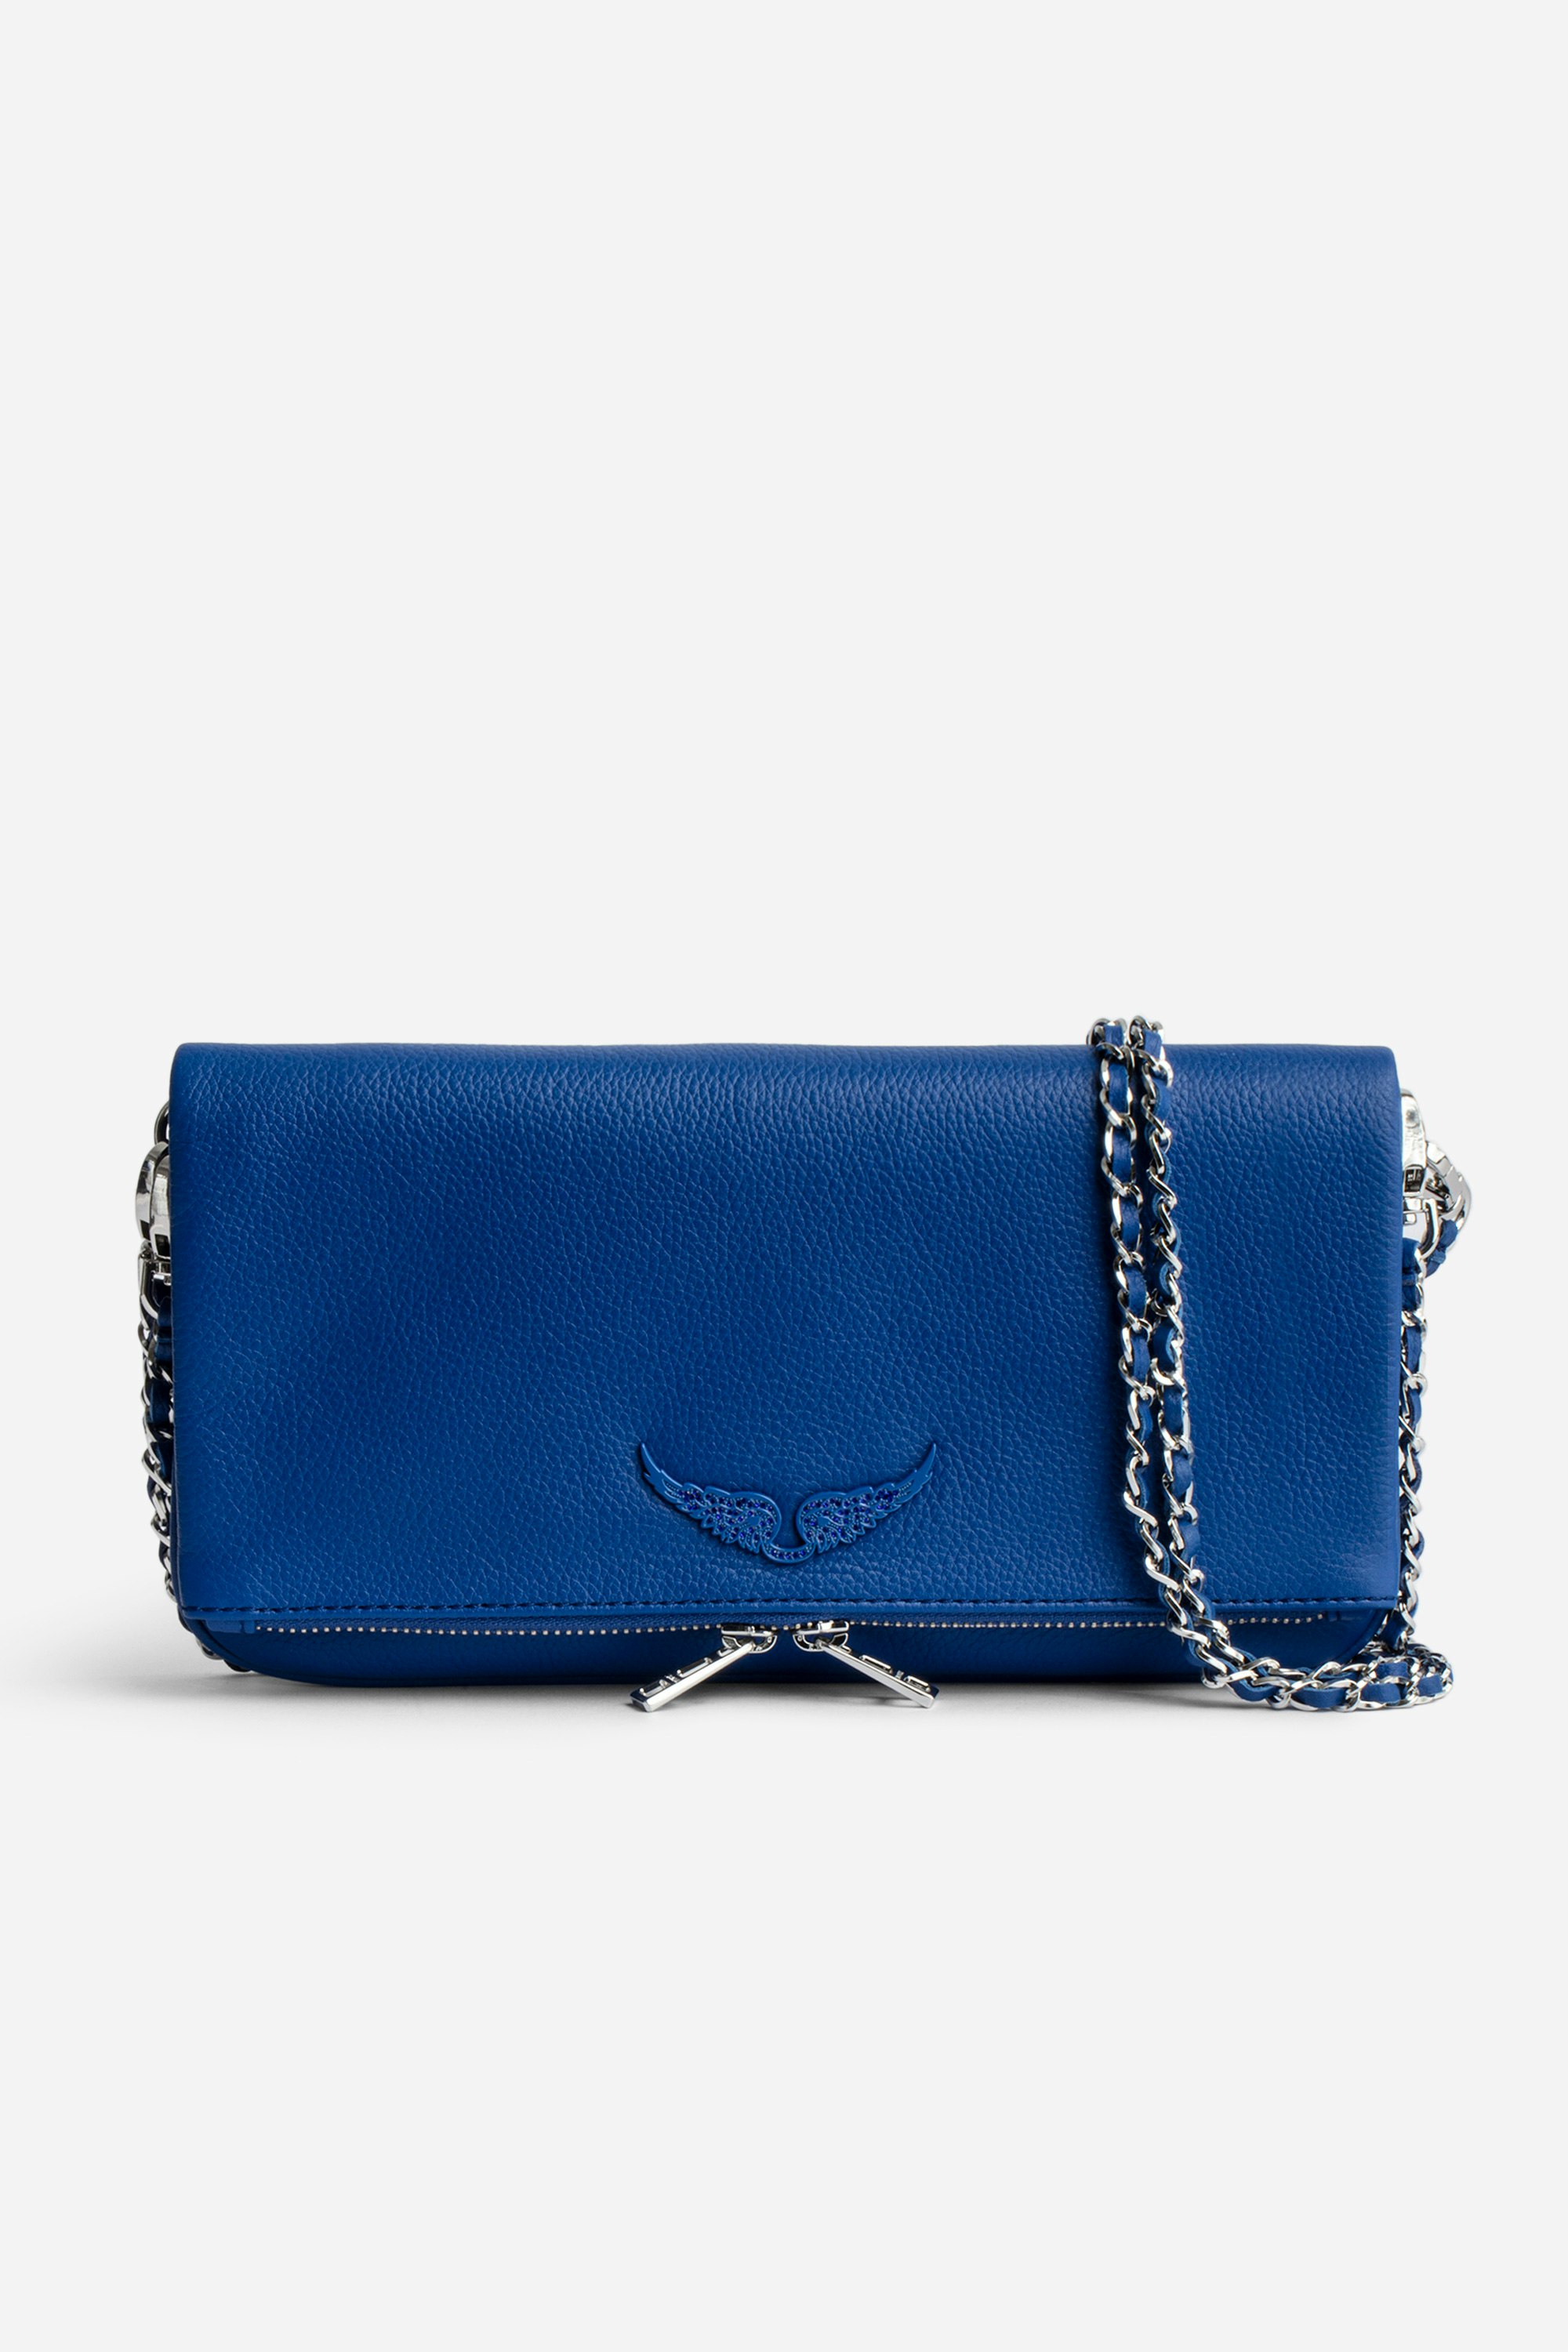 Rock Clutch Women’s blue grained leather clutch bag with double leather and metal chain strap.